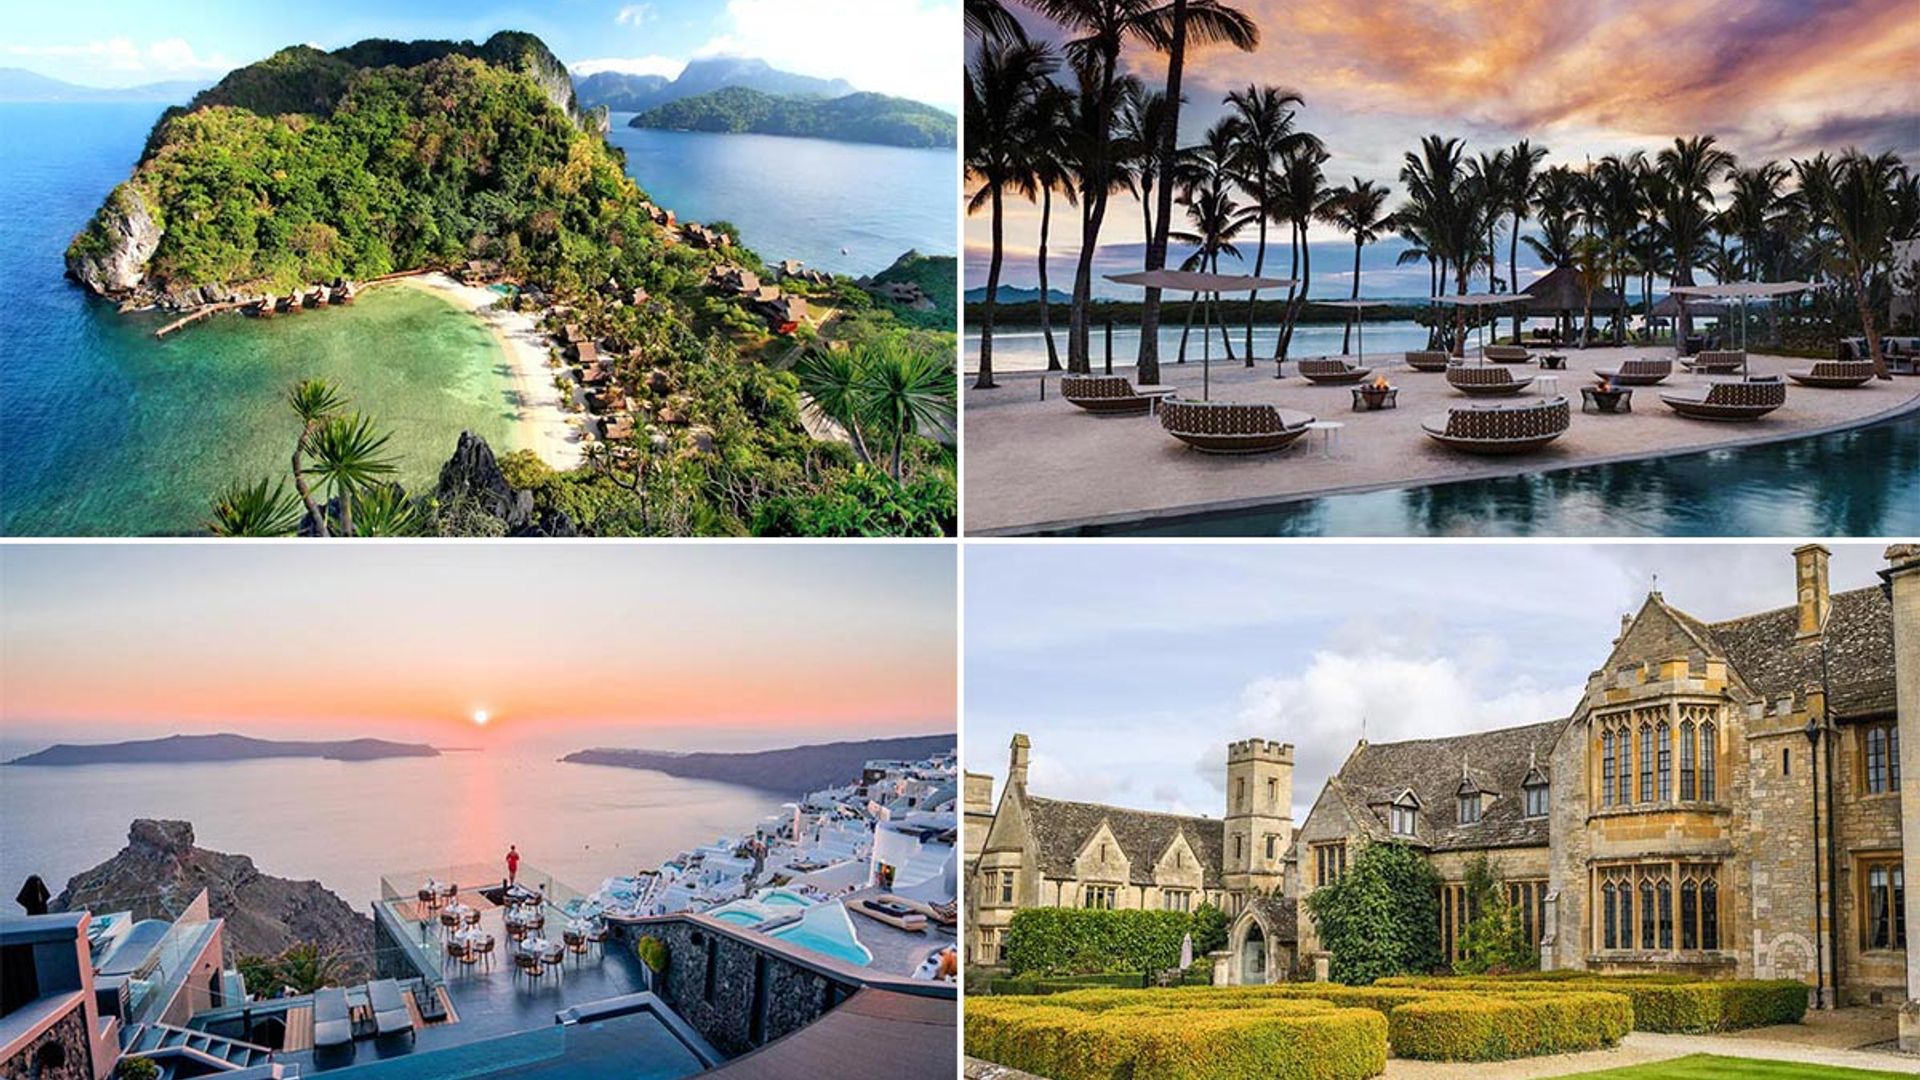 Best honeymoon destinations 2021: the most romantic spots to visit this year